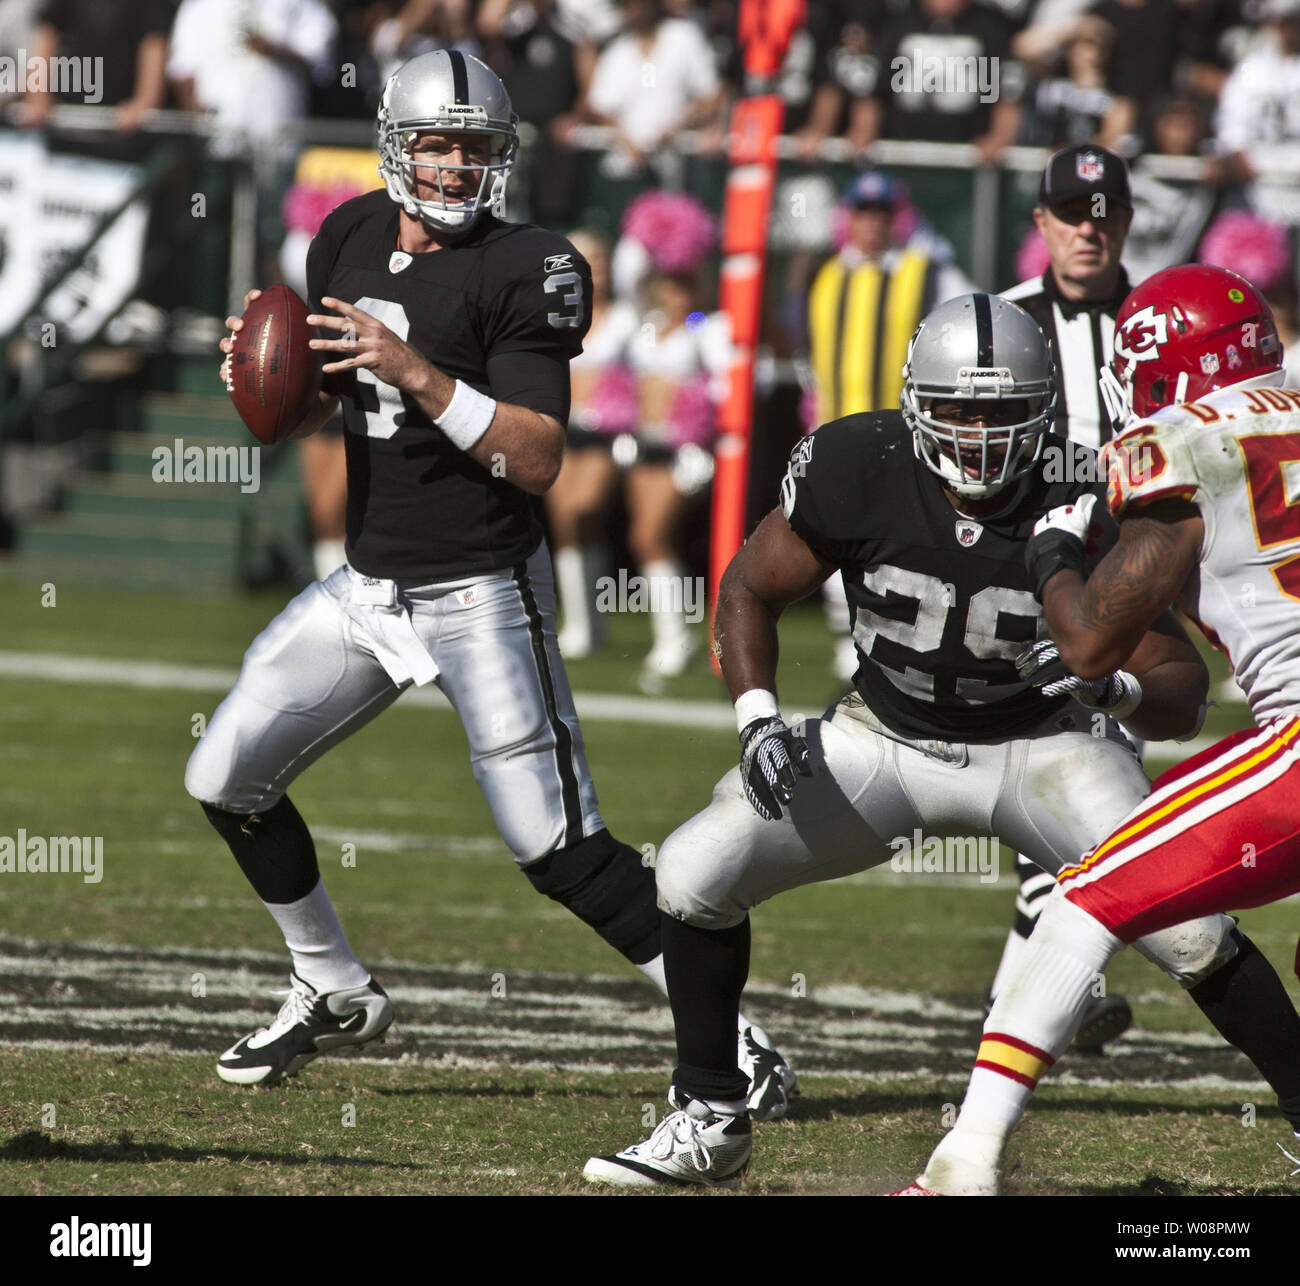 Oakland Raiders QB Kyle Boller (L) looks for a receiver in the first half against the Kansas City Chiefs at the O.co Coliseum in Oakland, California on October 23, 2011. Boller threw three interceptions in the 28-0 loss to the Chiefs.   UPI/Terry Schmitt Stock Photo